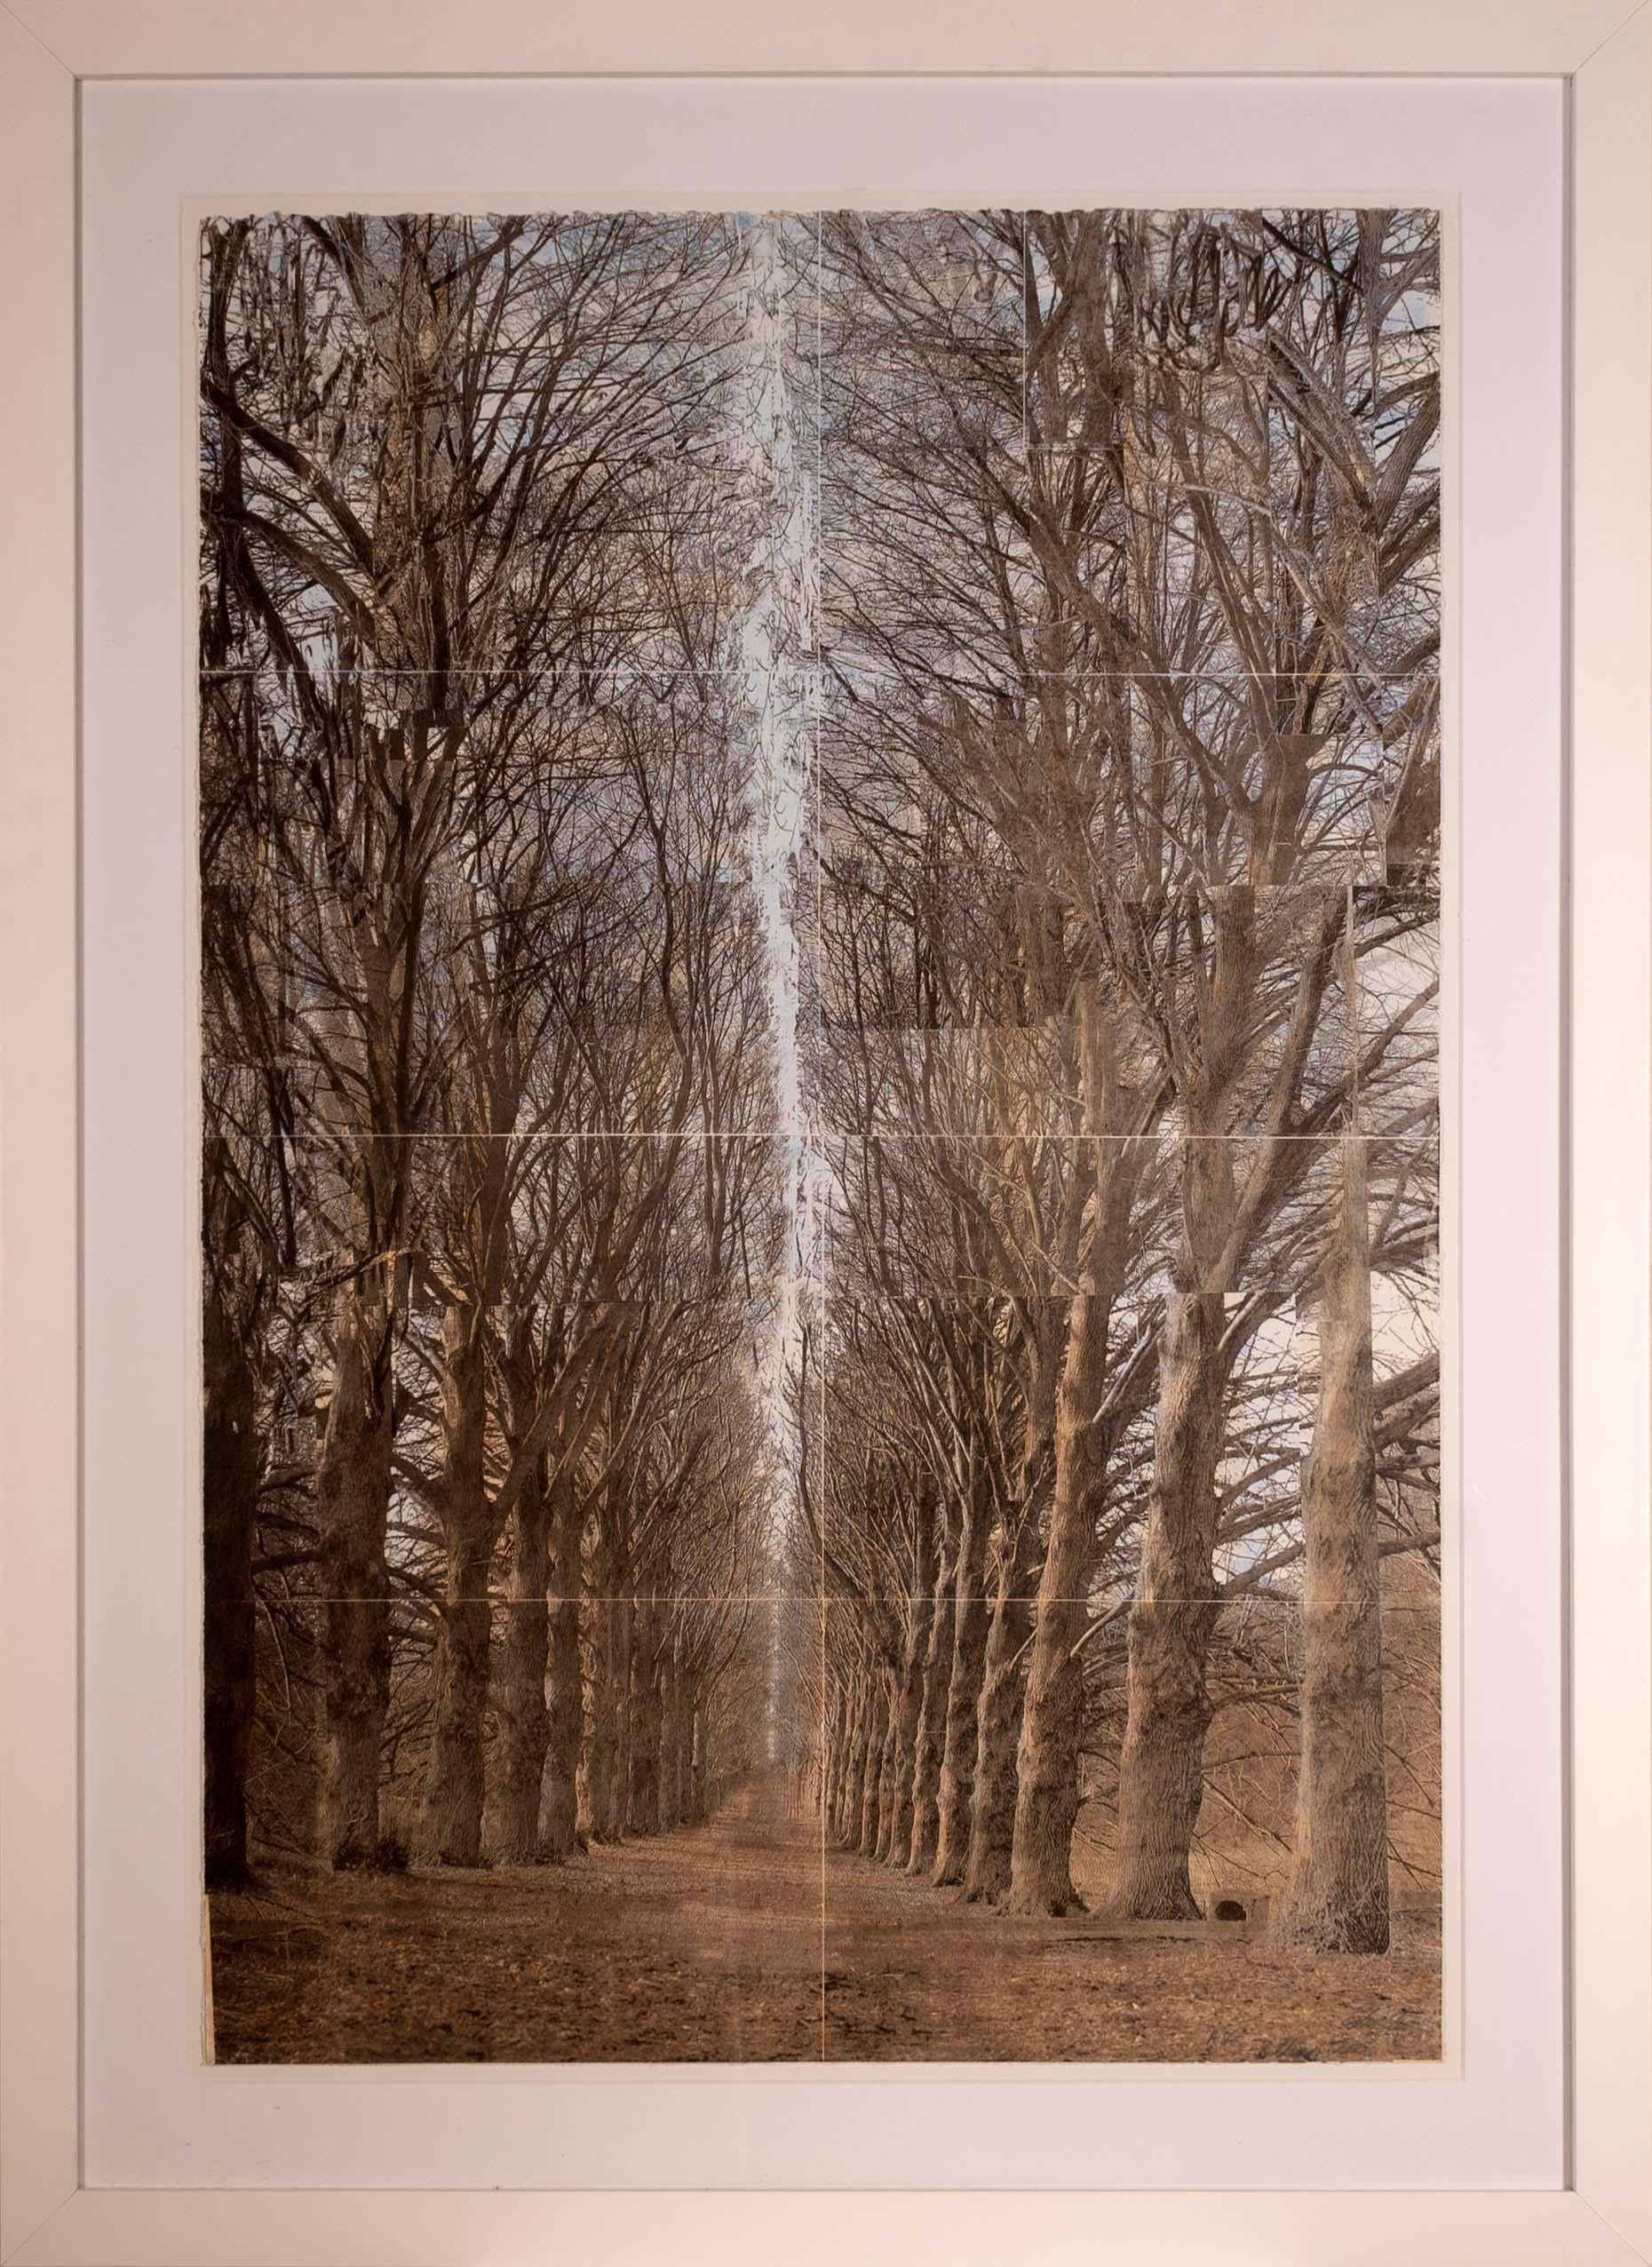 An artistic yet tranquil hand colored lithograph on paper titled “Allee (Alley of Trees)” by New York artist Esteban Chavez. Hand signed in pencil on the bottom right, with an A.P. annotation. Printed in 2005. Original gallery tag from Artspace from